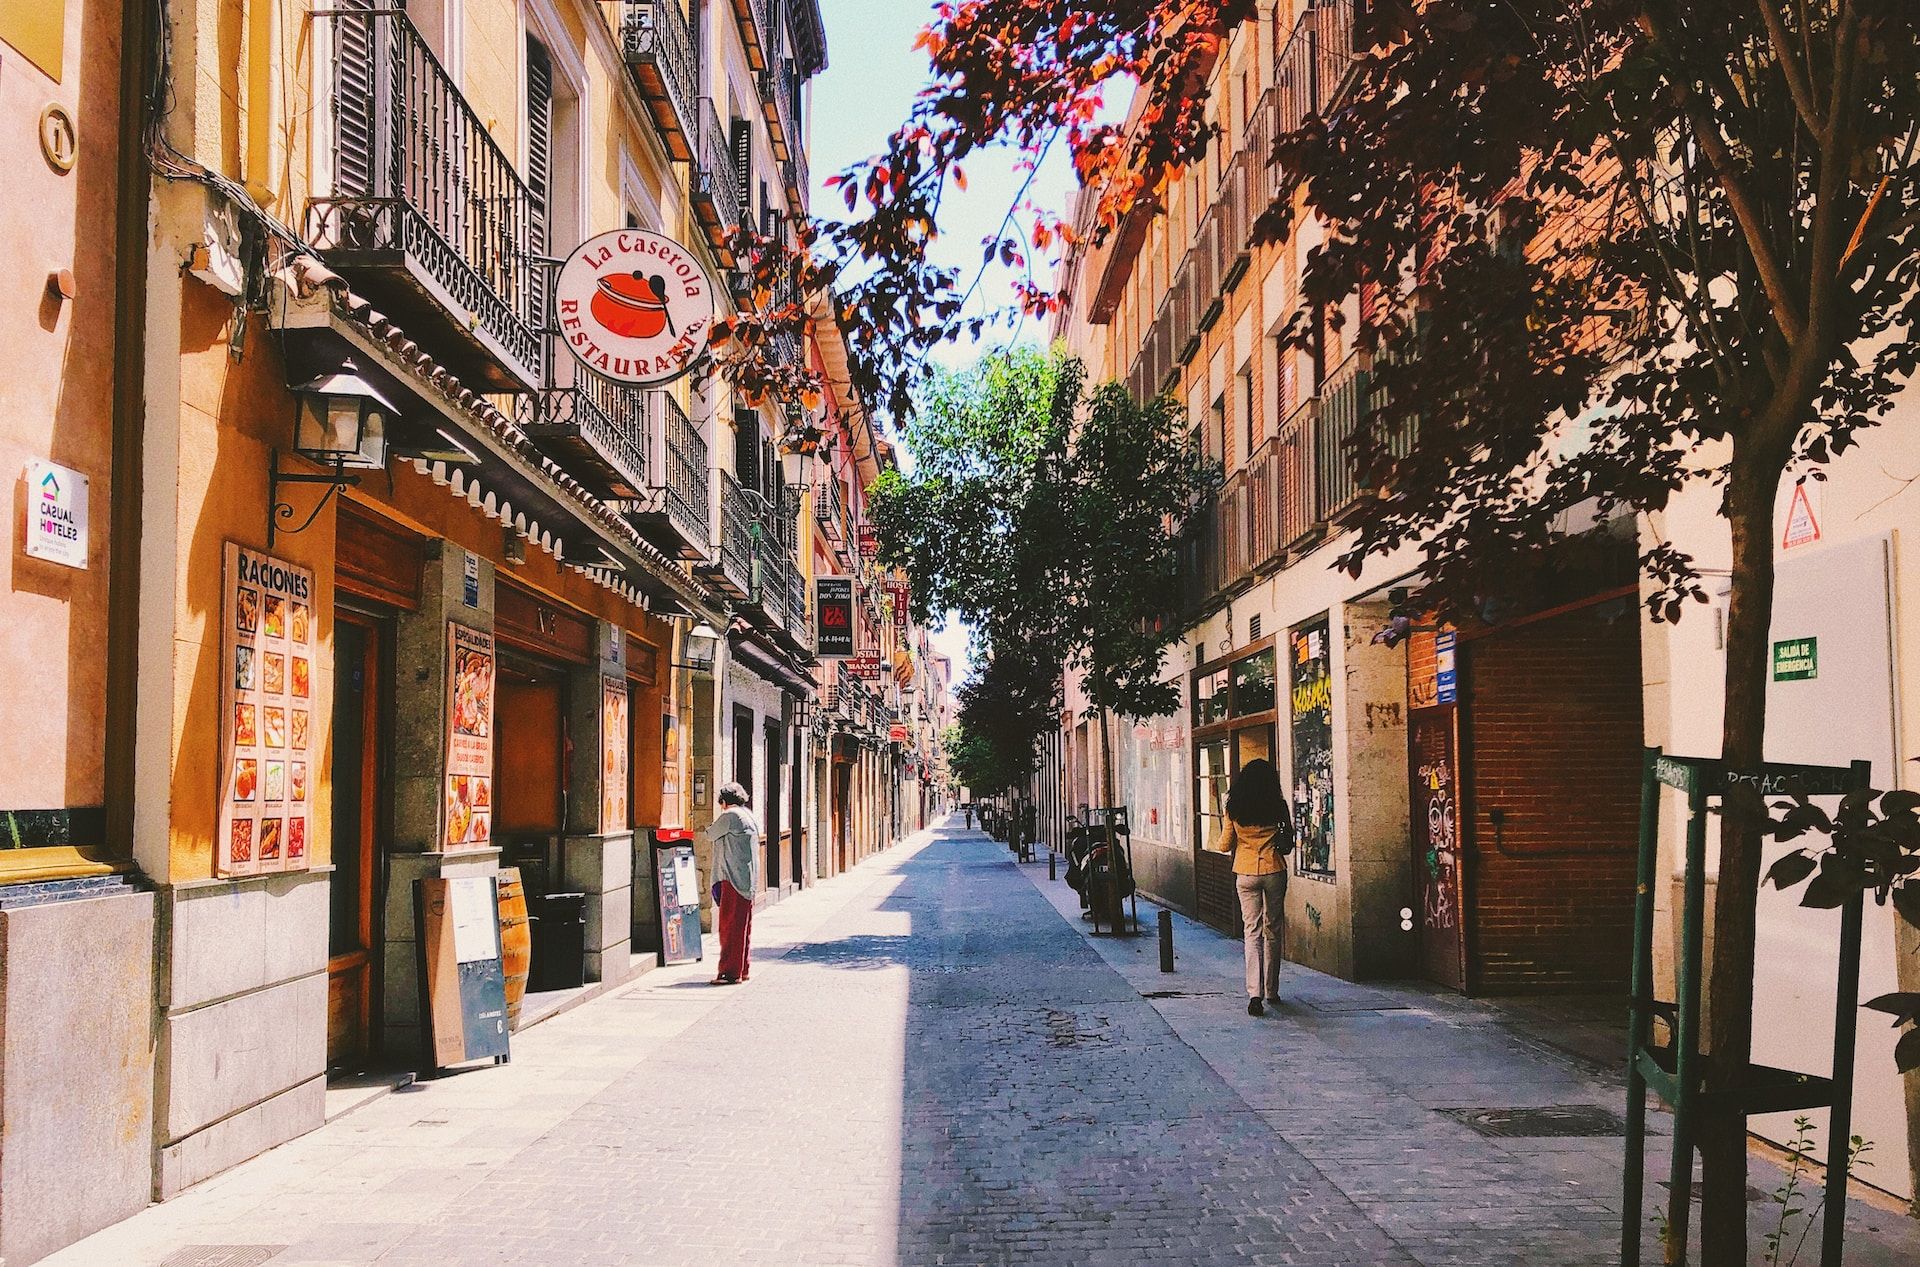 Madrid is the culinary capital of Spain with some of the best bars and restaurants